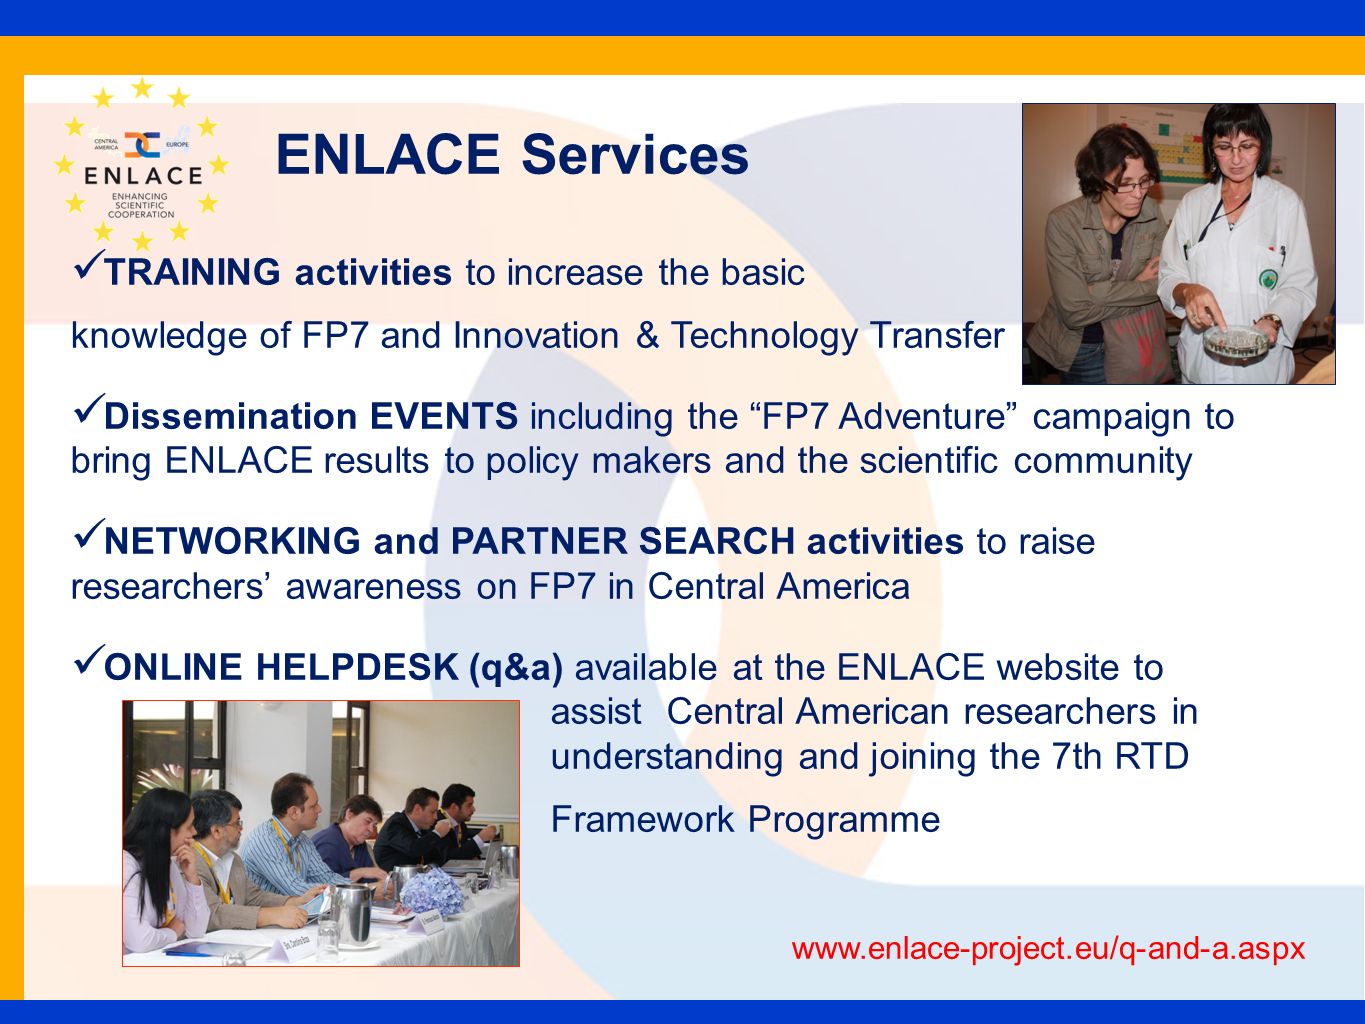 ENLACE Services TRAINING activities to increase the basic knowledge of FP7 and Innovation & Technology Transfer Dissemination EVENTS including the FP7 Adventure campaign to bring ENLACE results to policy makers and the scientific community NETWORKING and PARTNER SEARCH activities to raise researchers awareness on FP7 in Central America ONLINE HELPDESK (q&a) available at the ENLACE website to assist Central American researchers in understanding and joining the 7th RTD Framework Programme